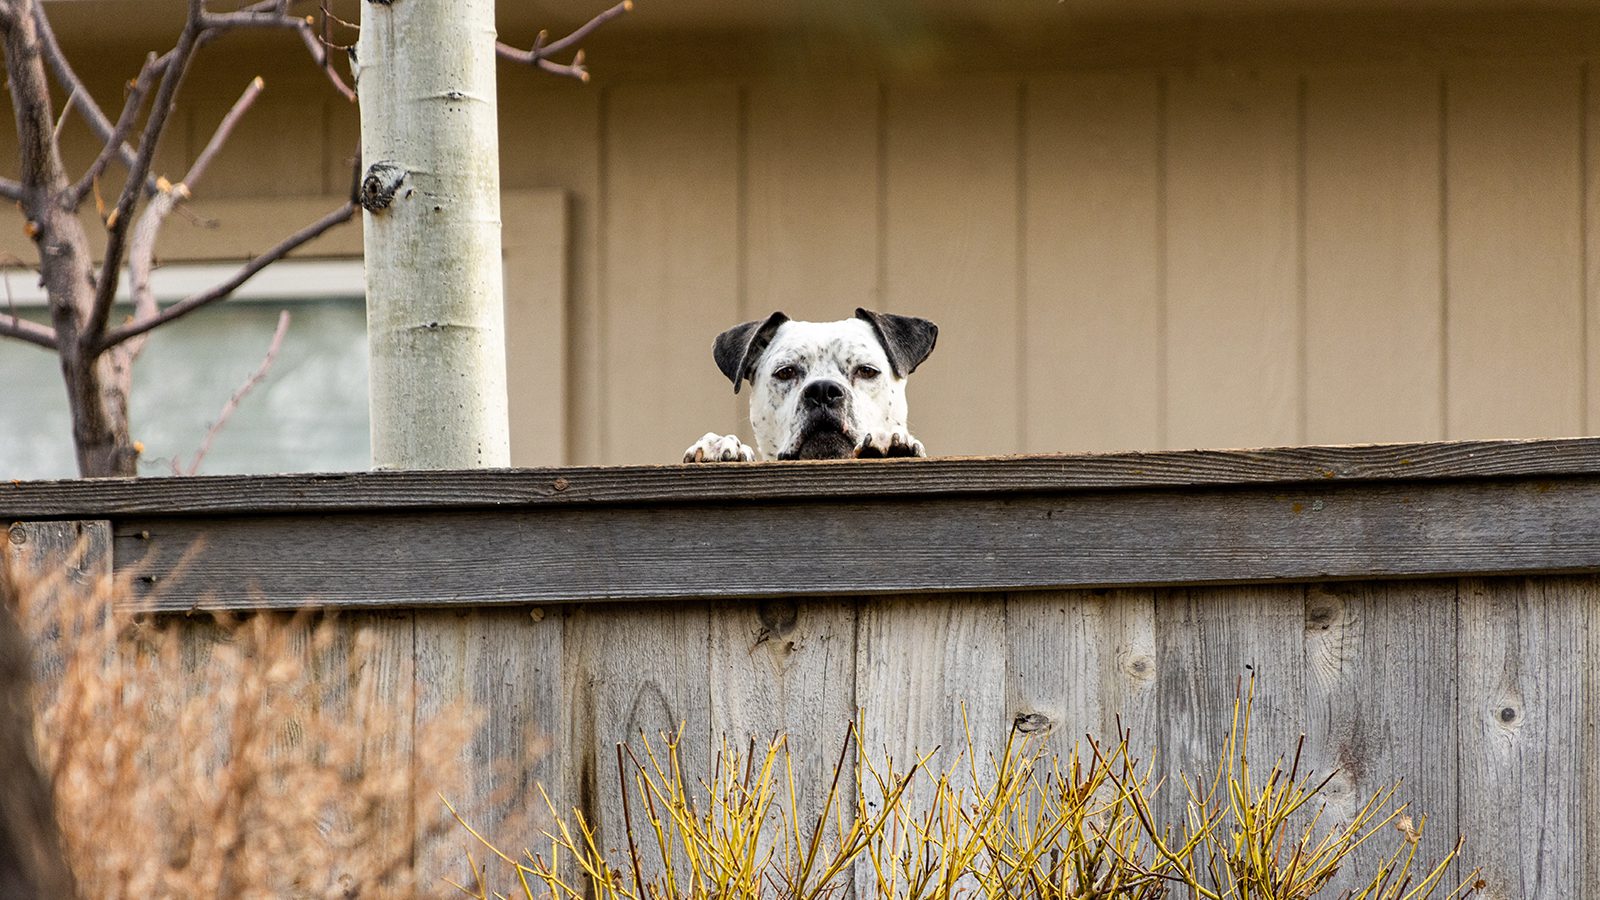 Study Finds That Neighborhoods With Dogs Are Often the Safest